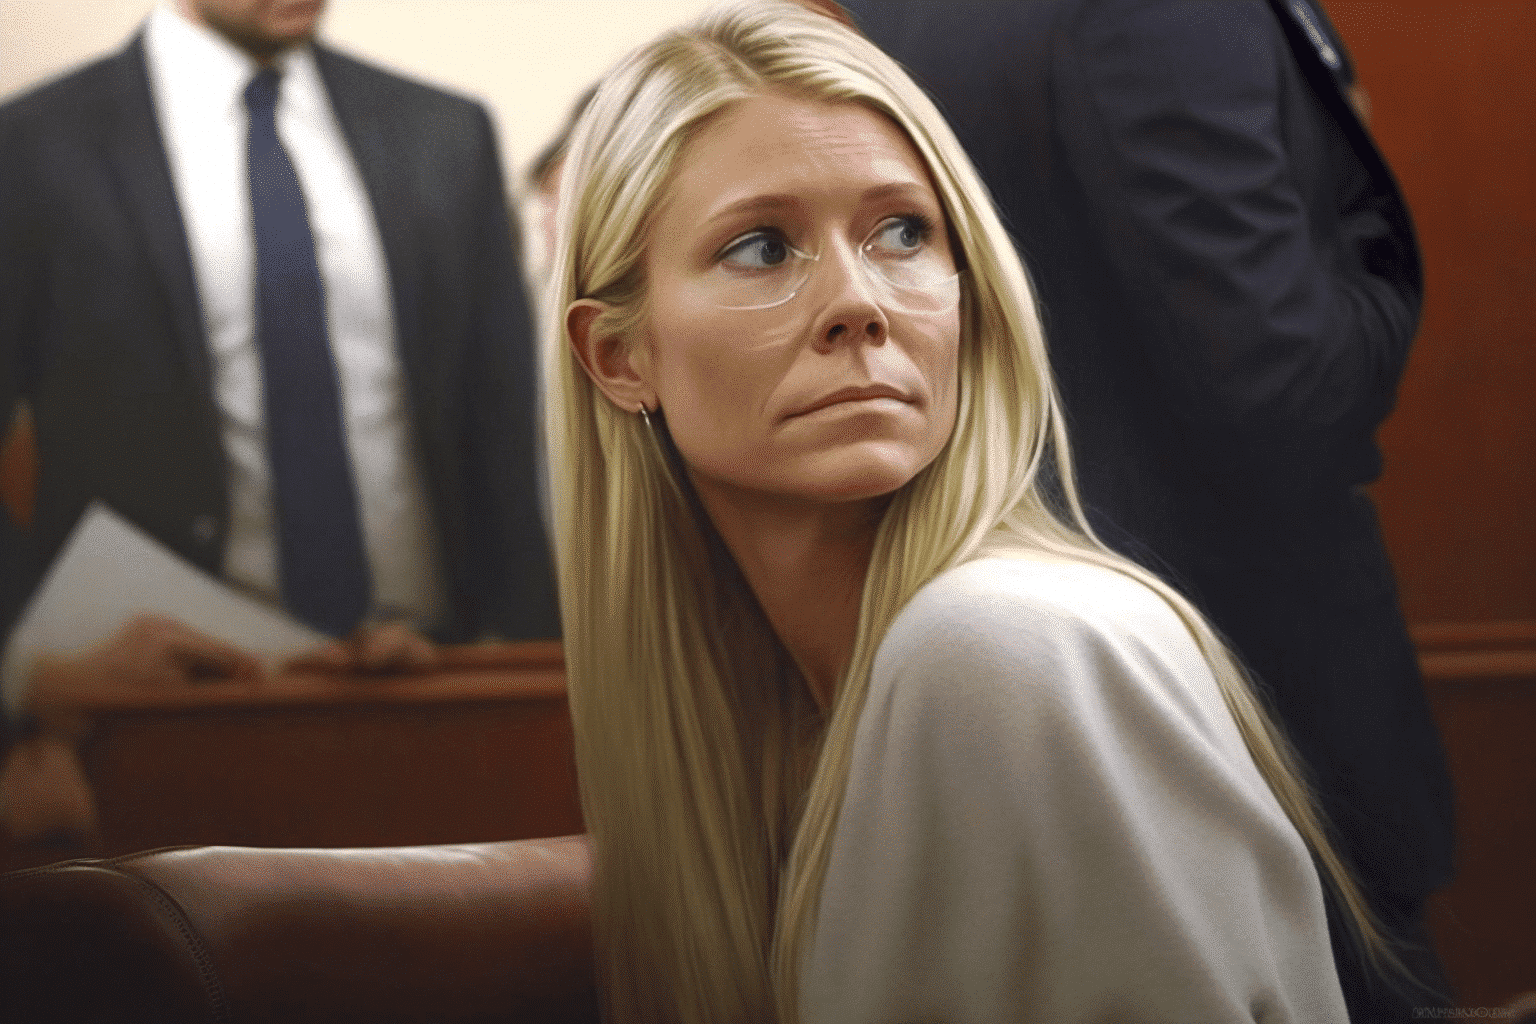 academy-award-winning-actress-gwyneth-paltrow-seeks-strict-court-conditions-in-$200m-ski-accident-lawsuit